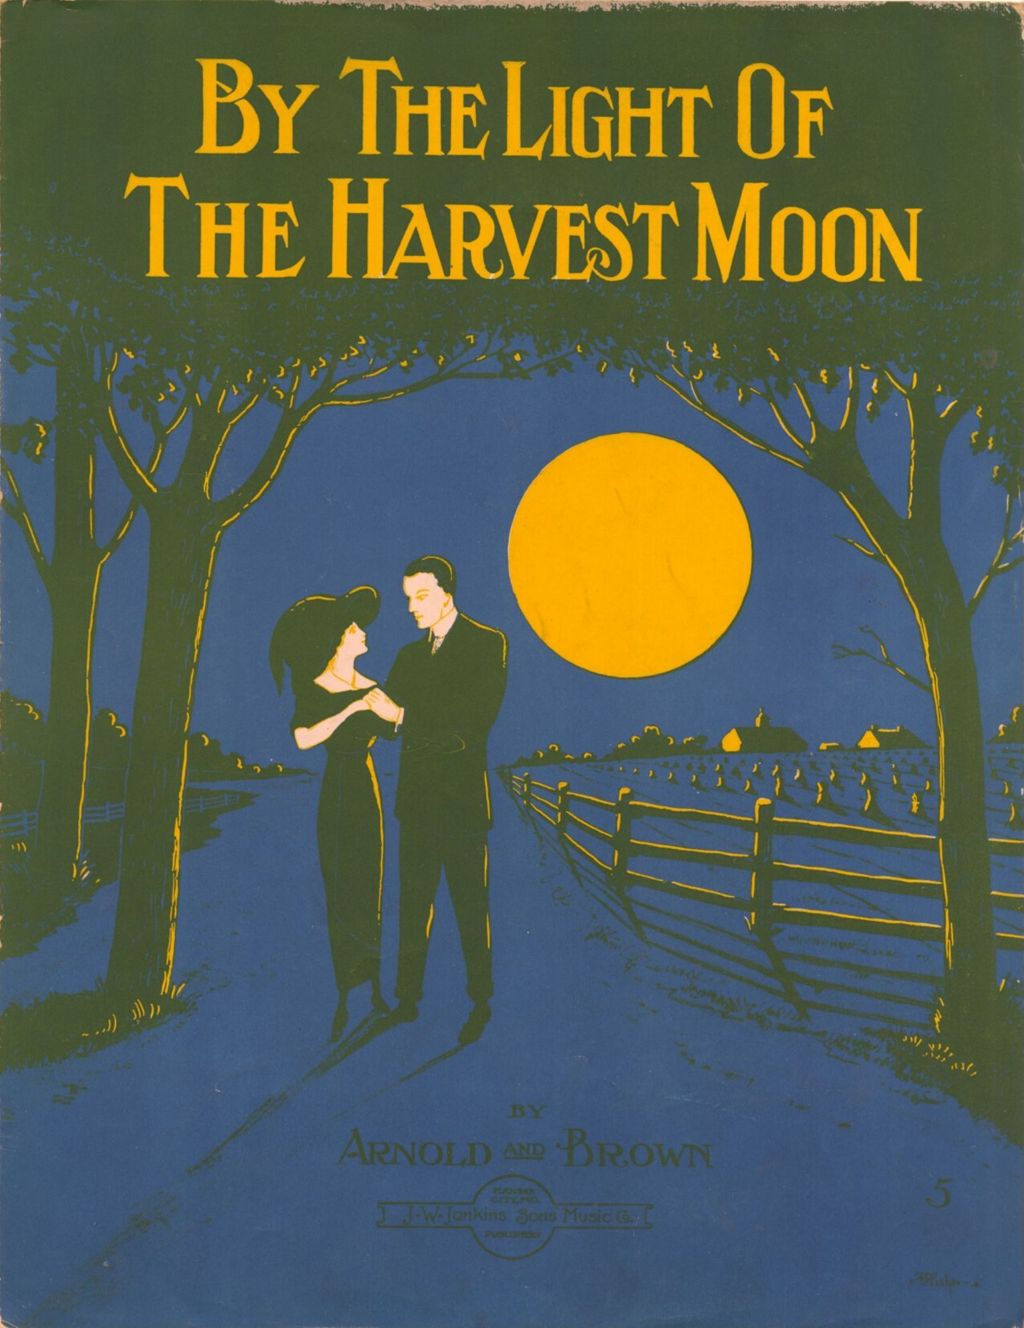 Miniature of By The Light of The Harvest Moon